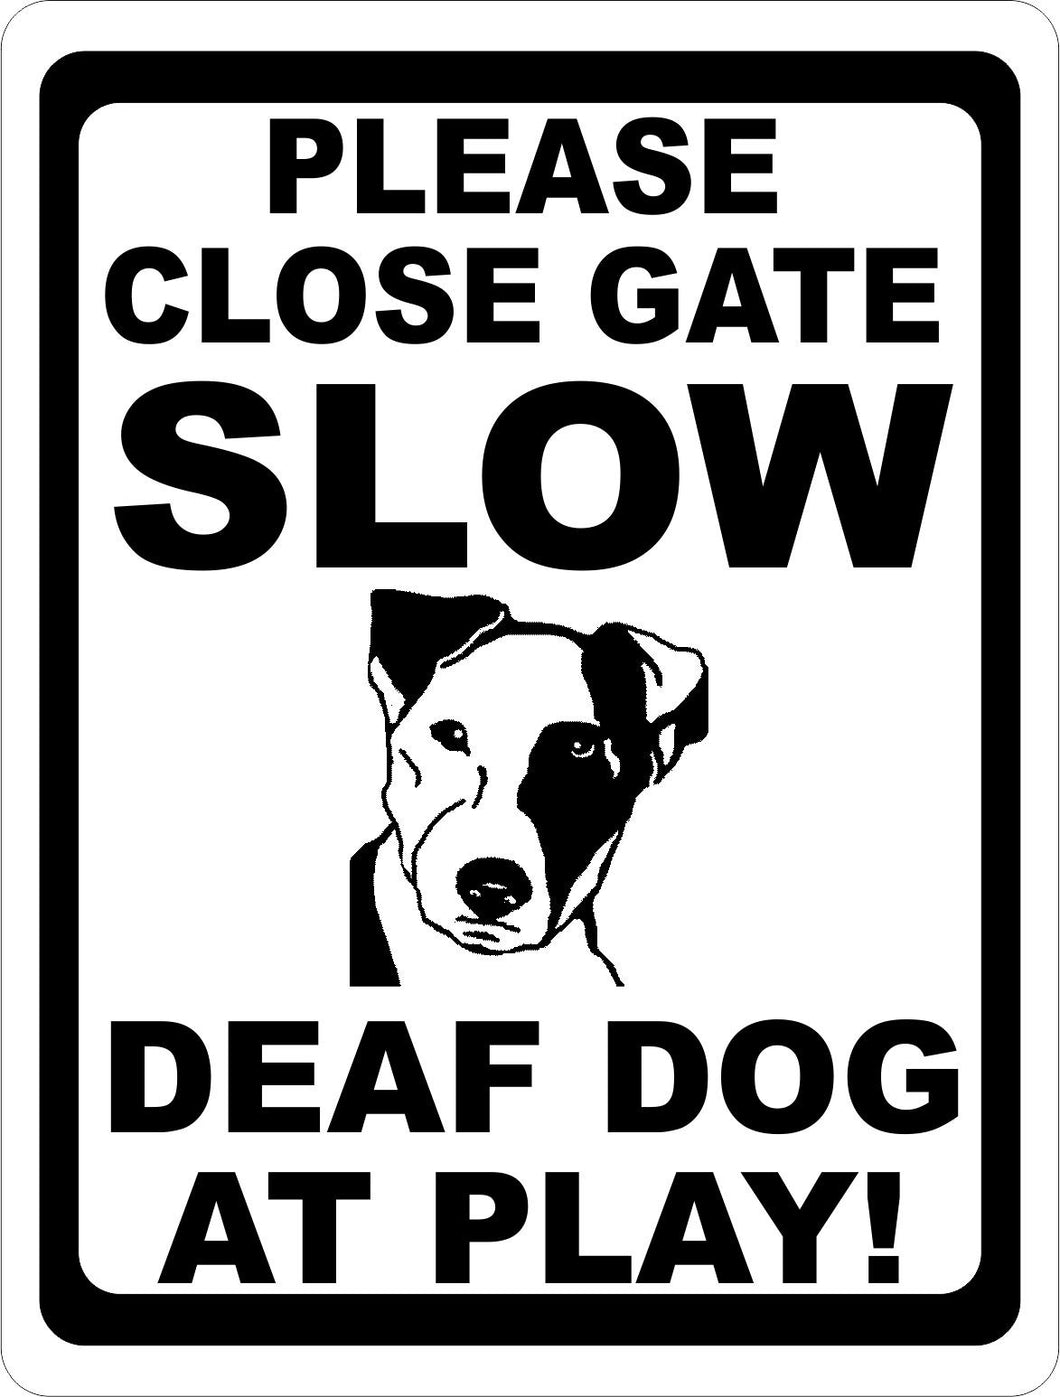 Please Close the Gate Slow Deaf Dog at Play Sign - Signs & Decals by SalaGraphics